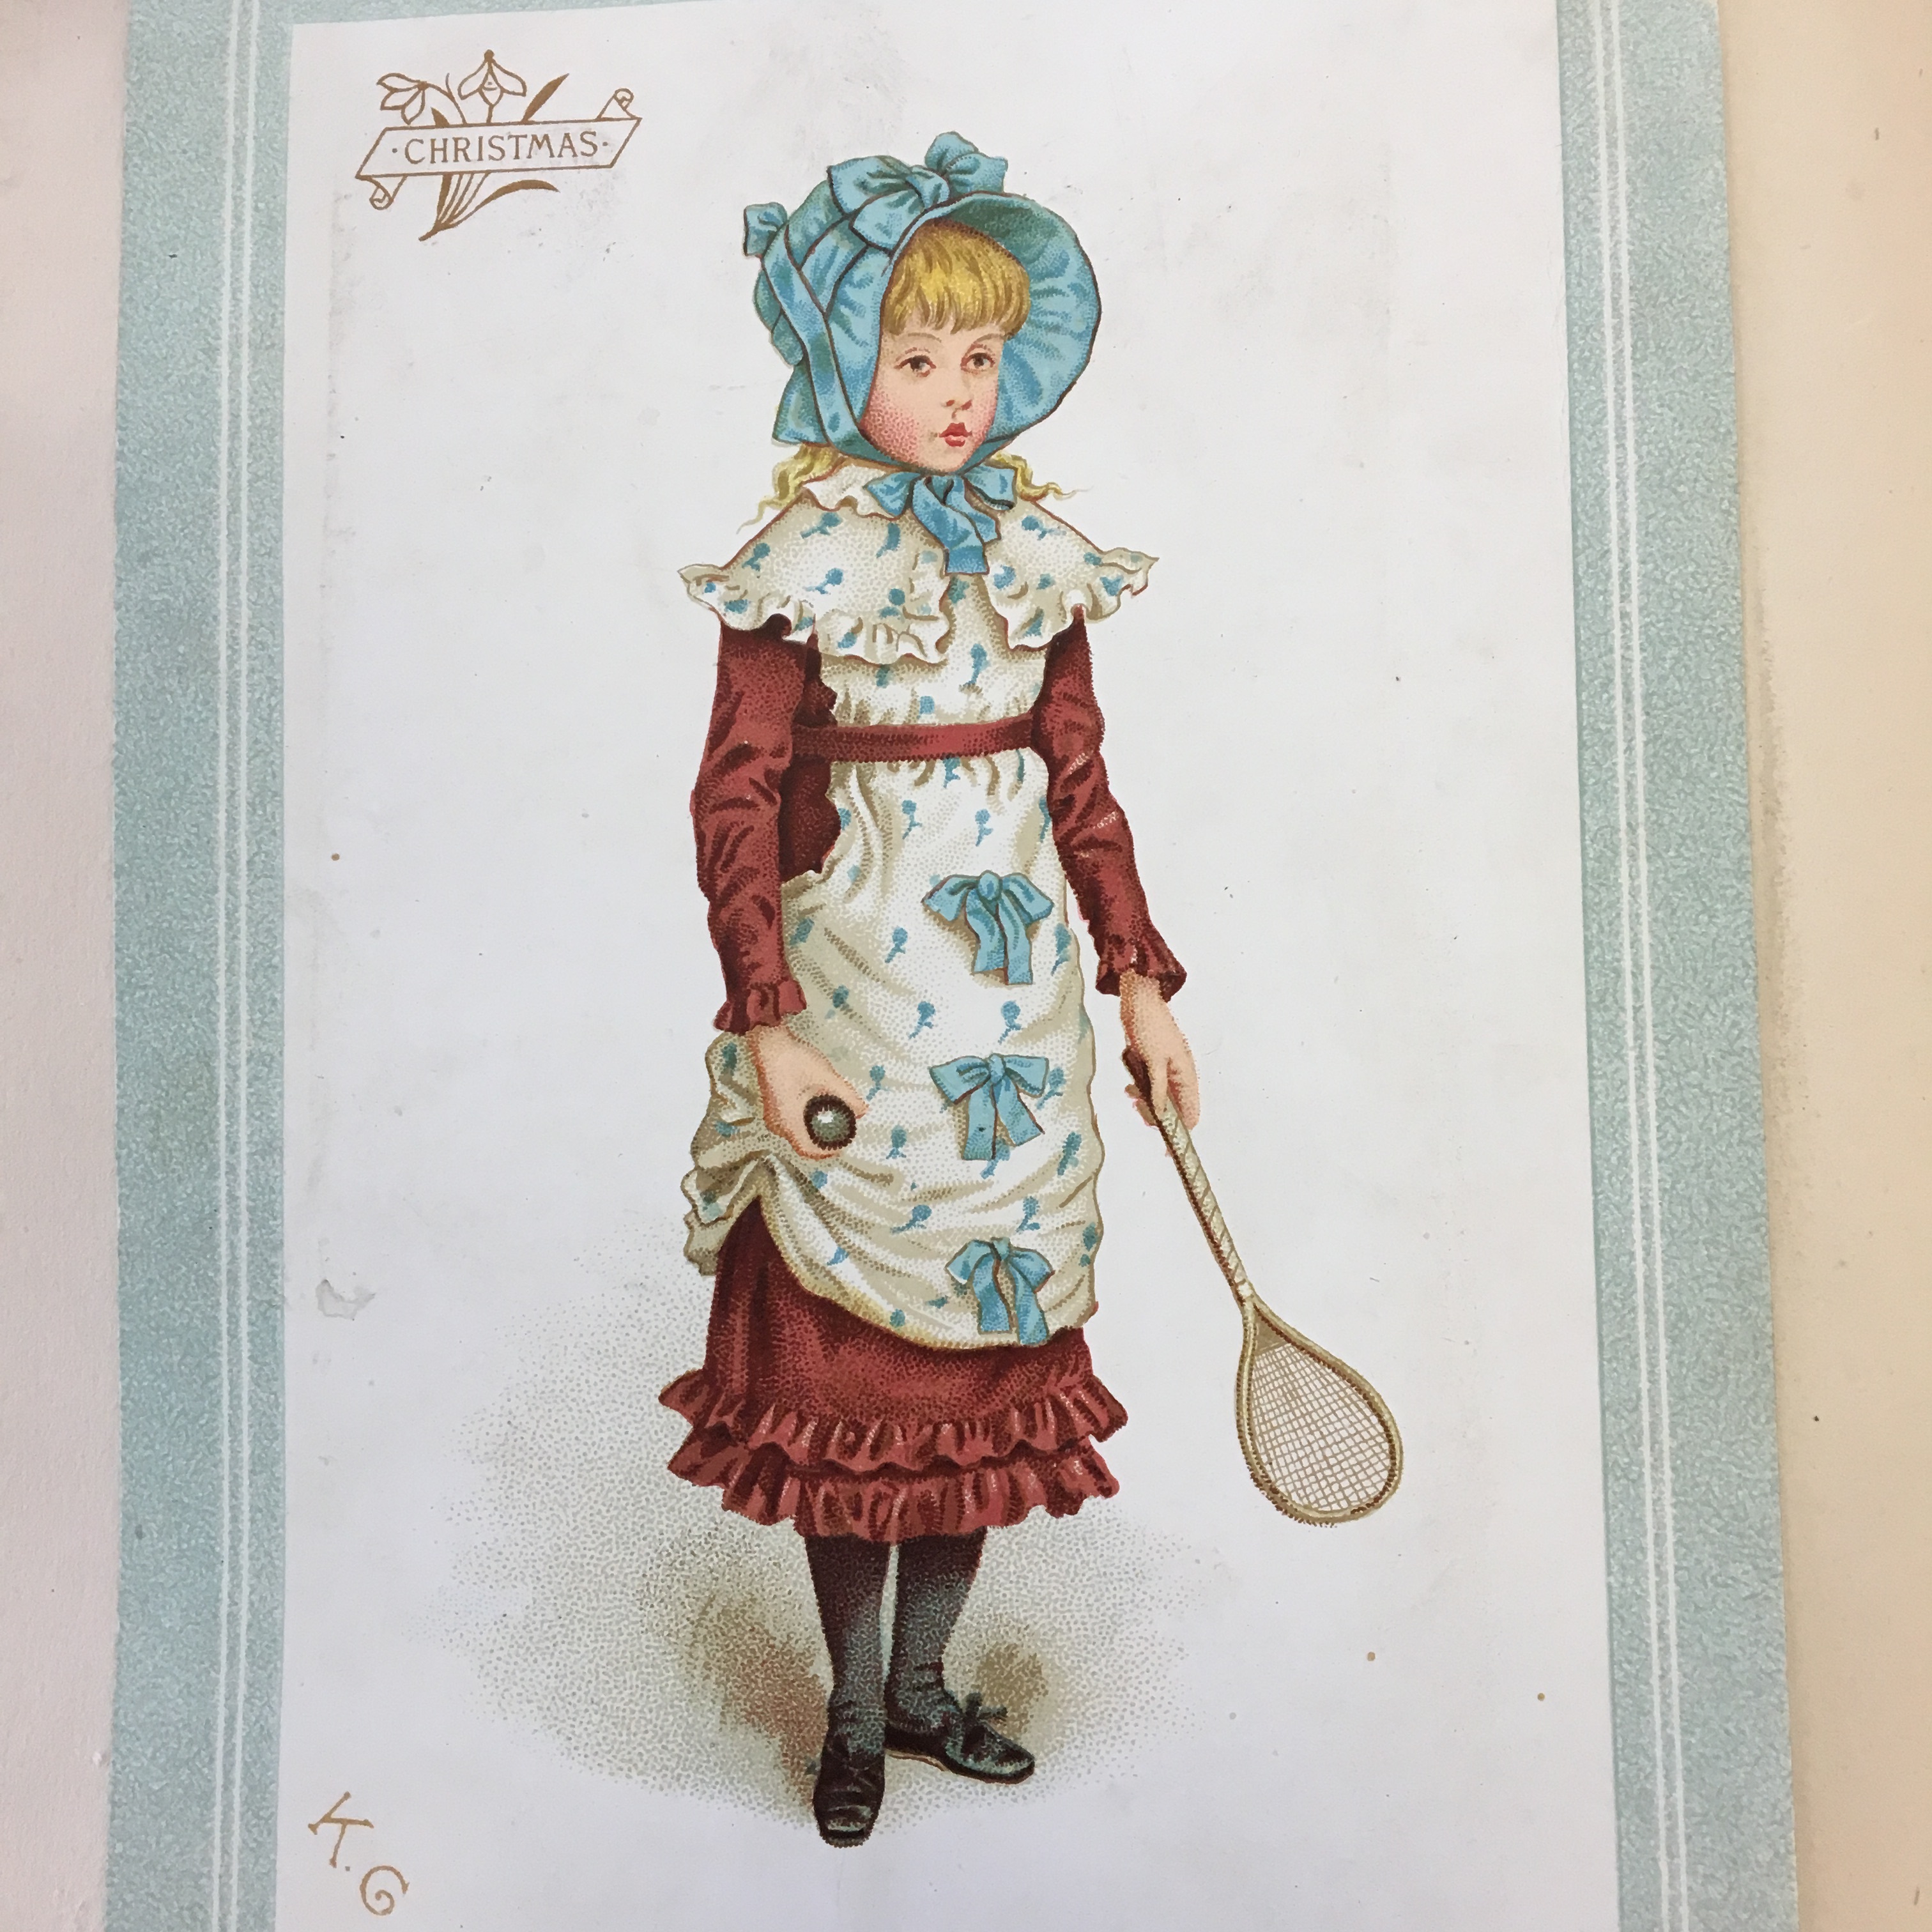 painting of a girl with a blue bonnet, dress, and tennis racket